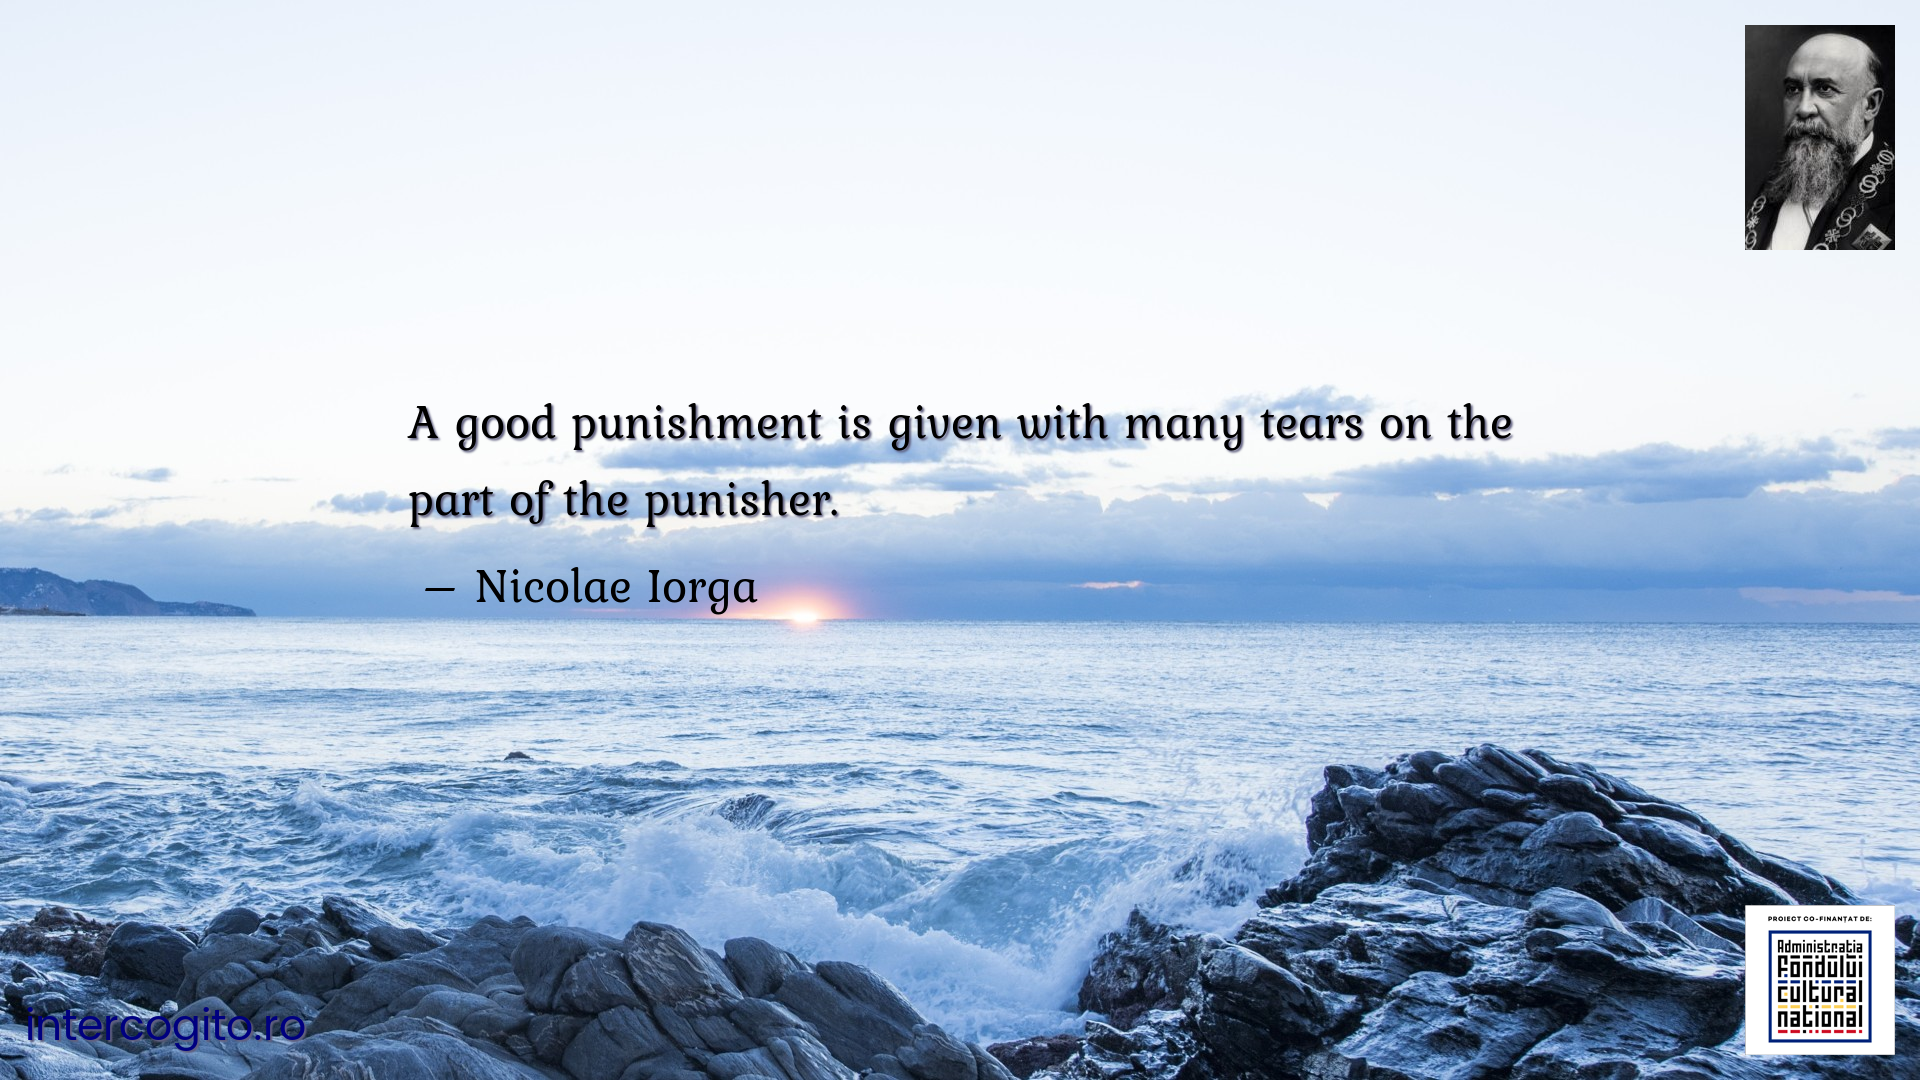 A good punishment is given with many tears on the part of the punisher.